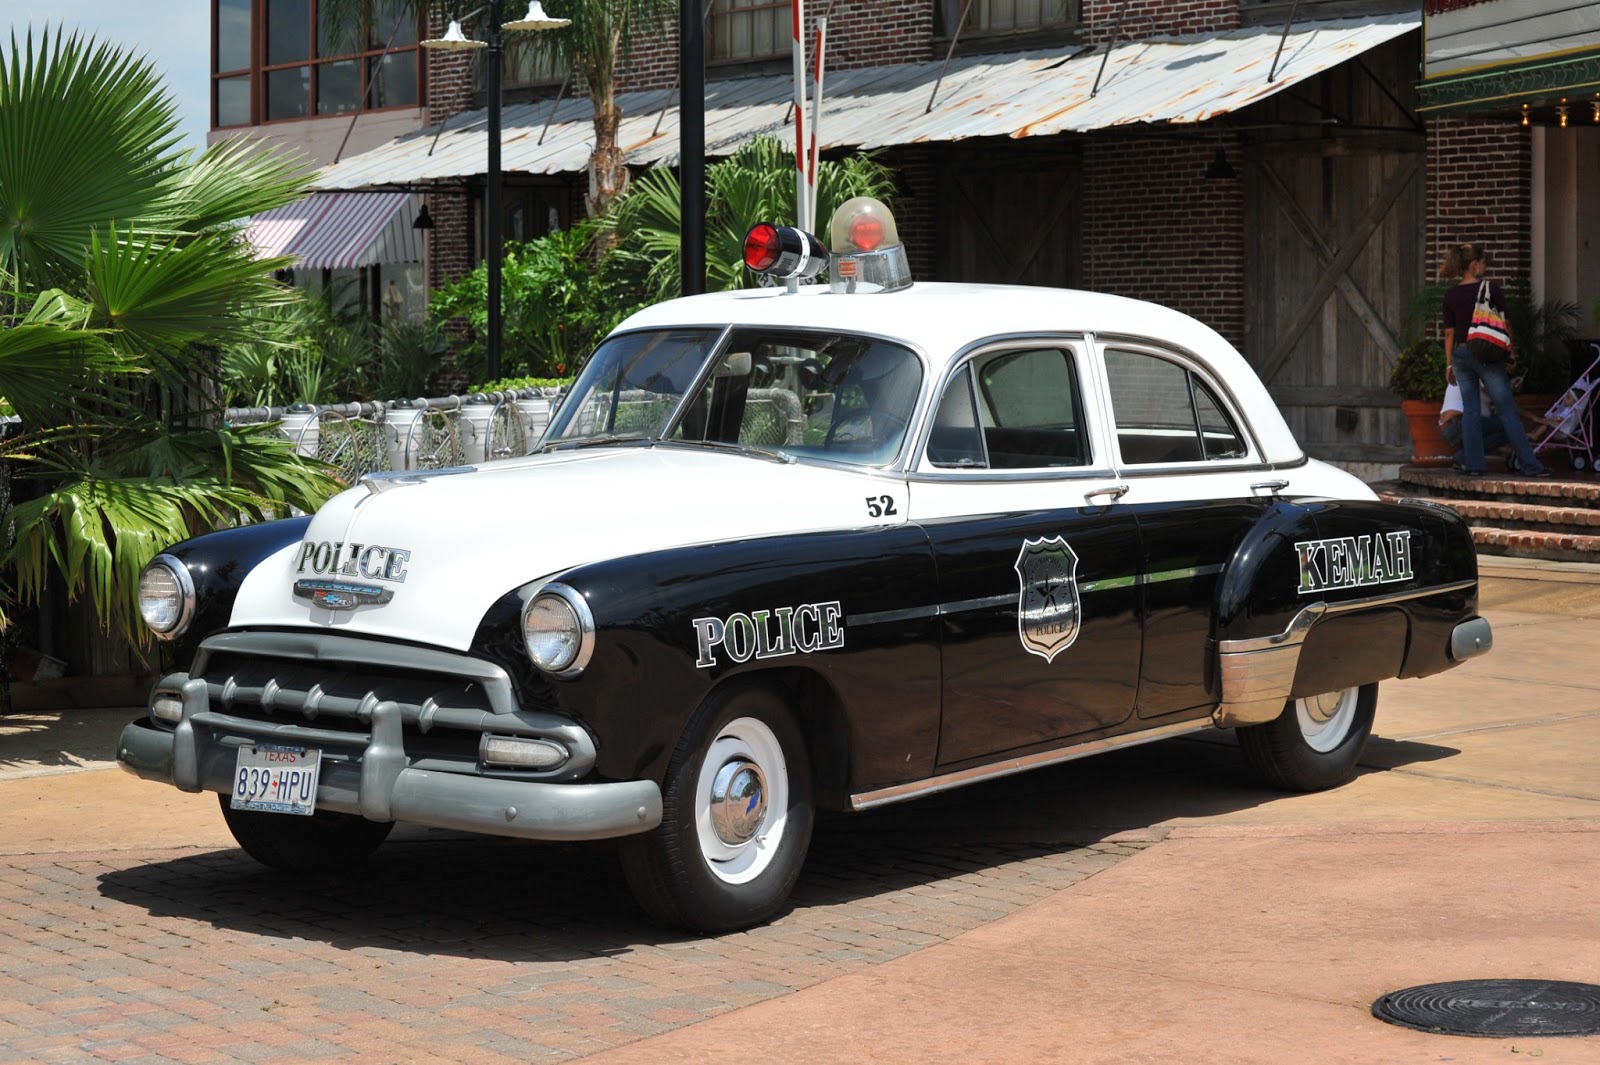 Cause Cops Care: Old Police Car in Kemah, Texas